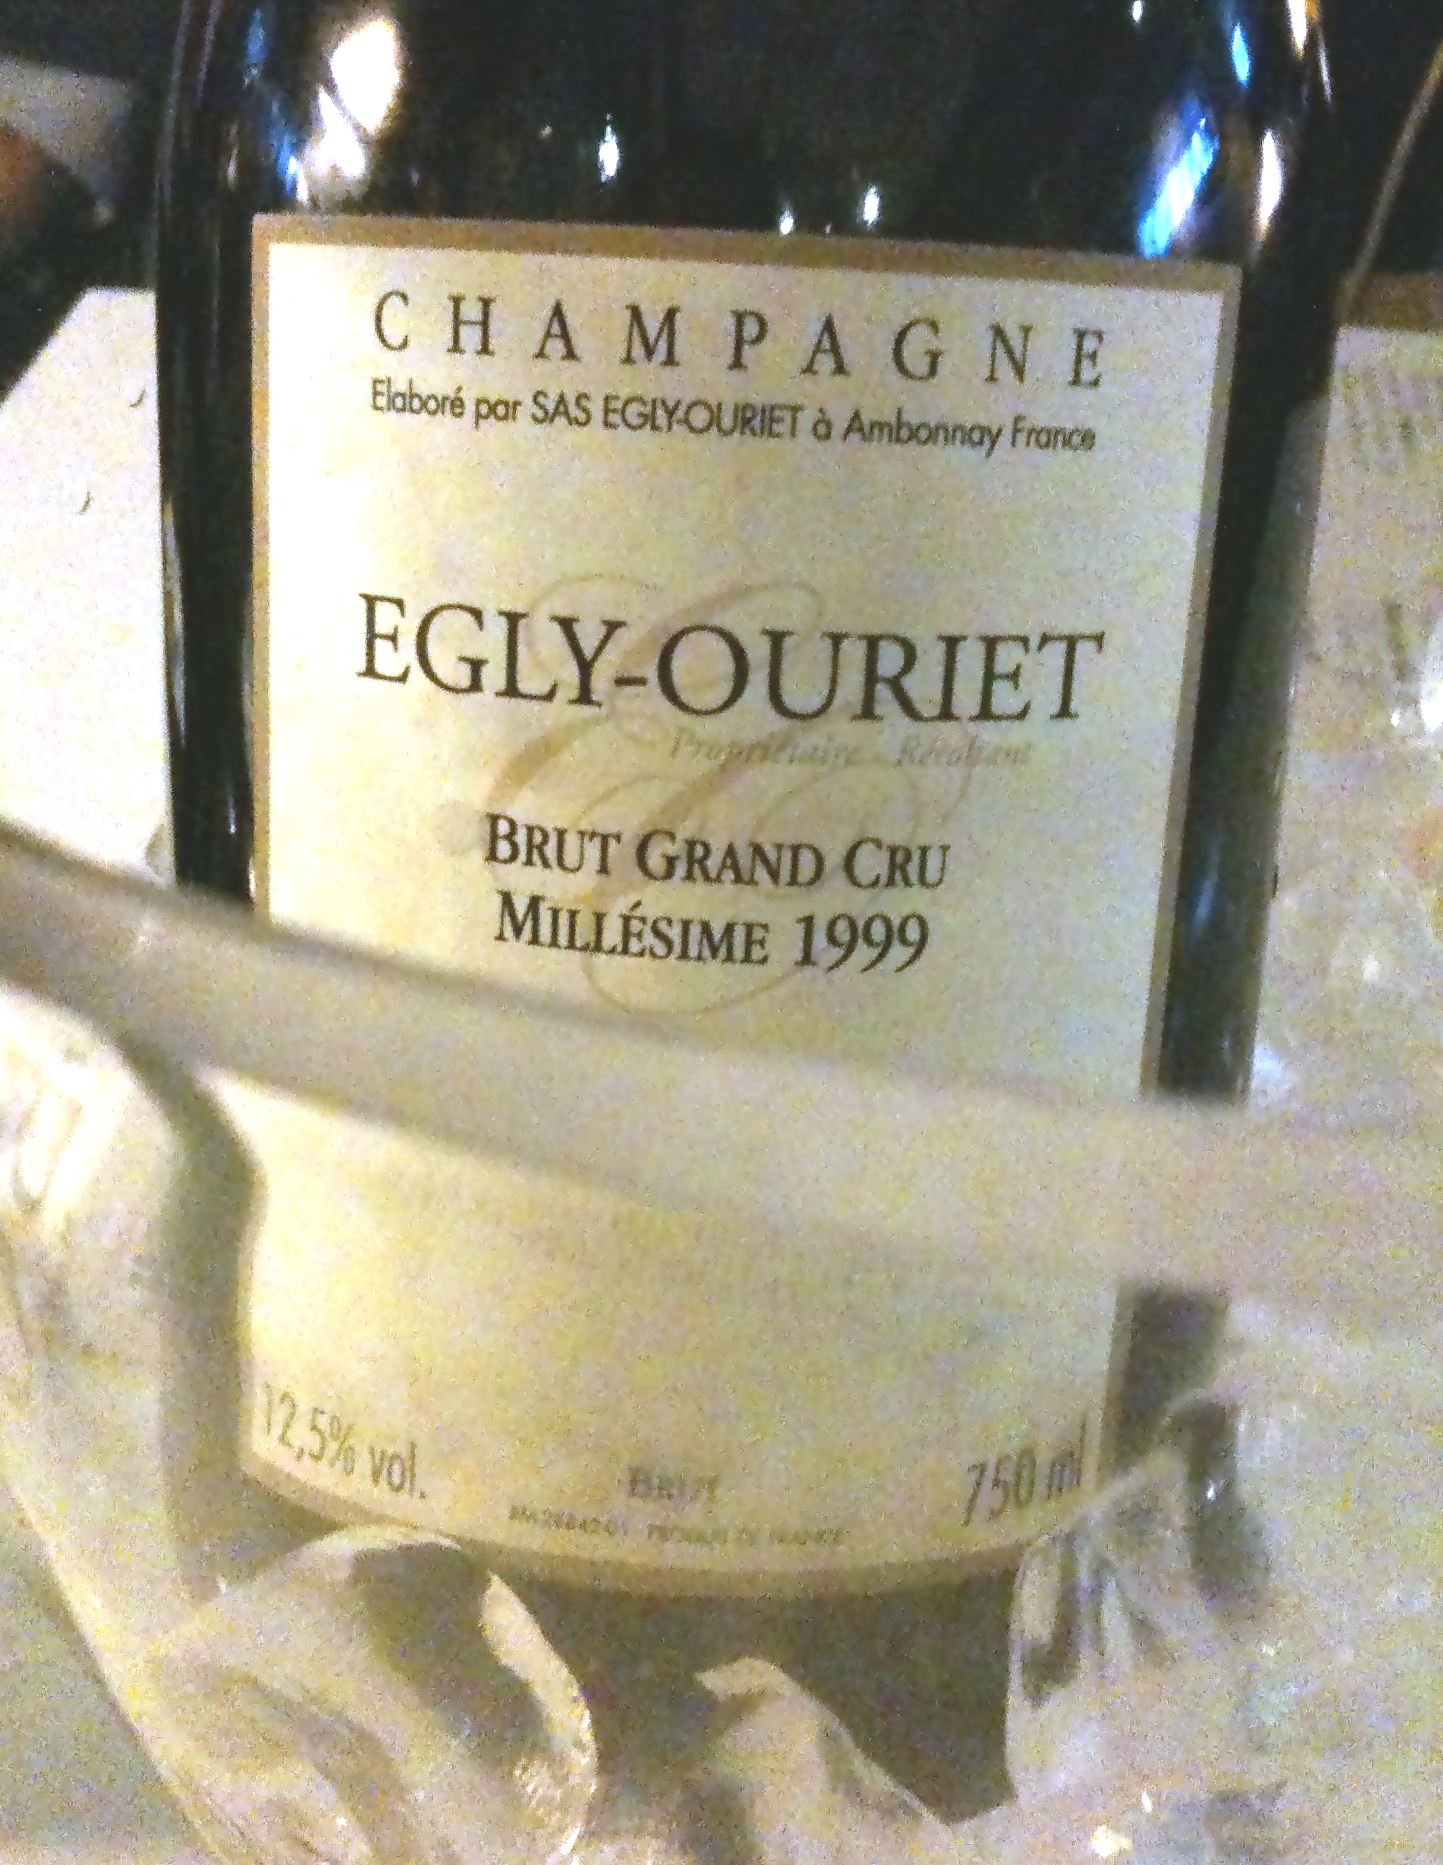 Égly-Ouriet Champagne Brut 1999